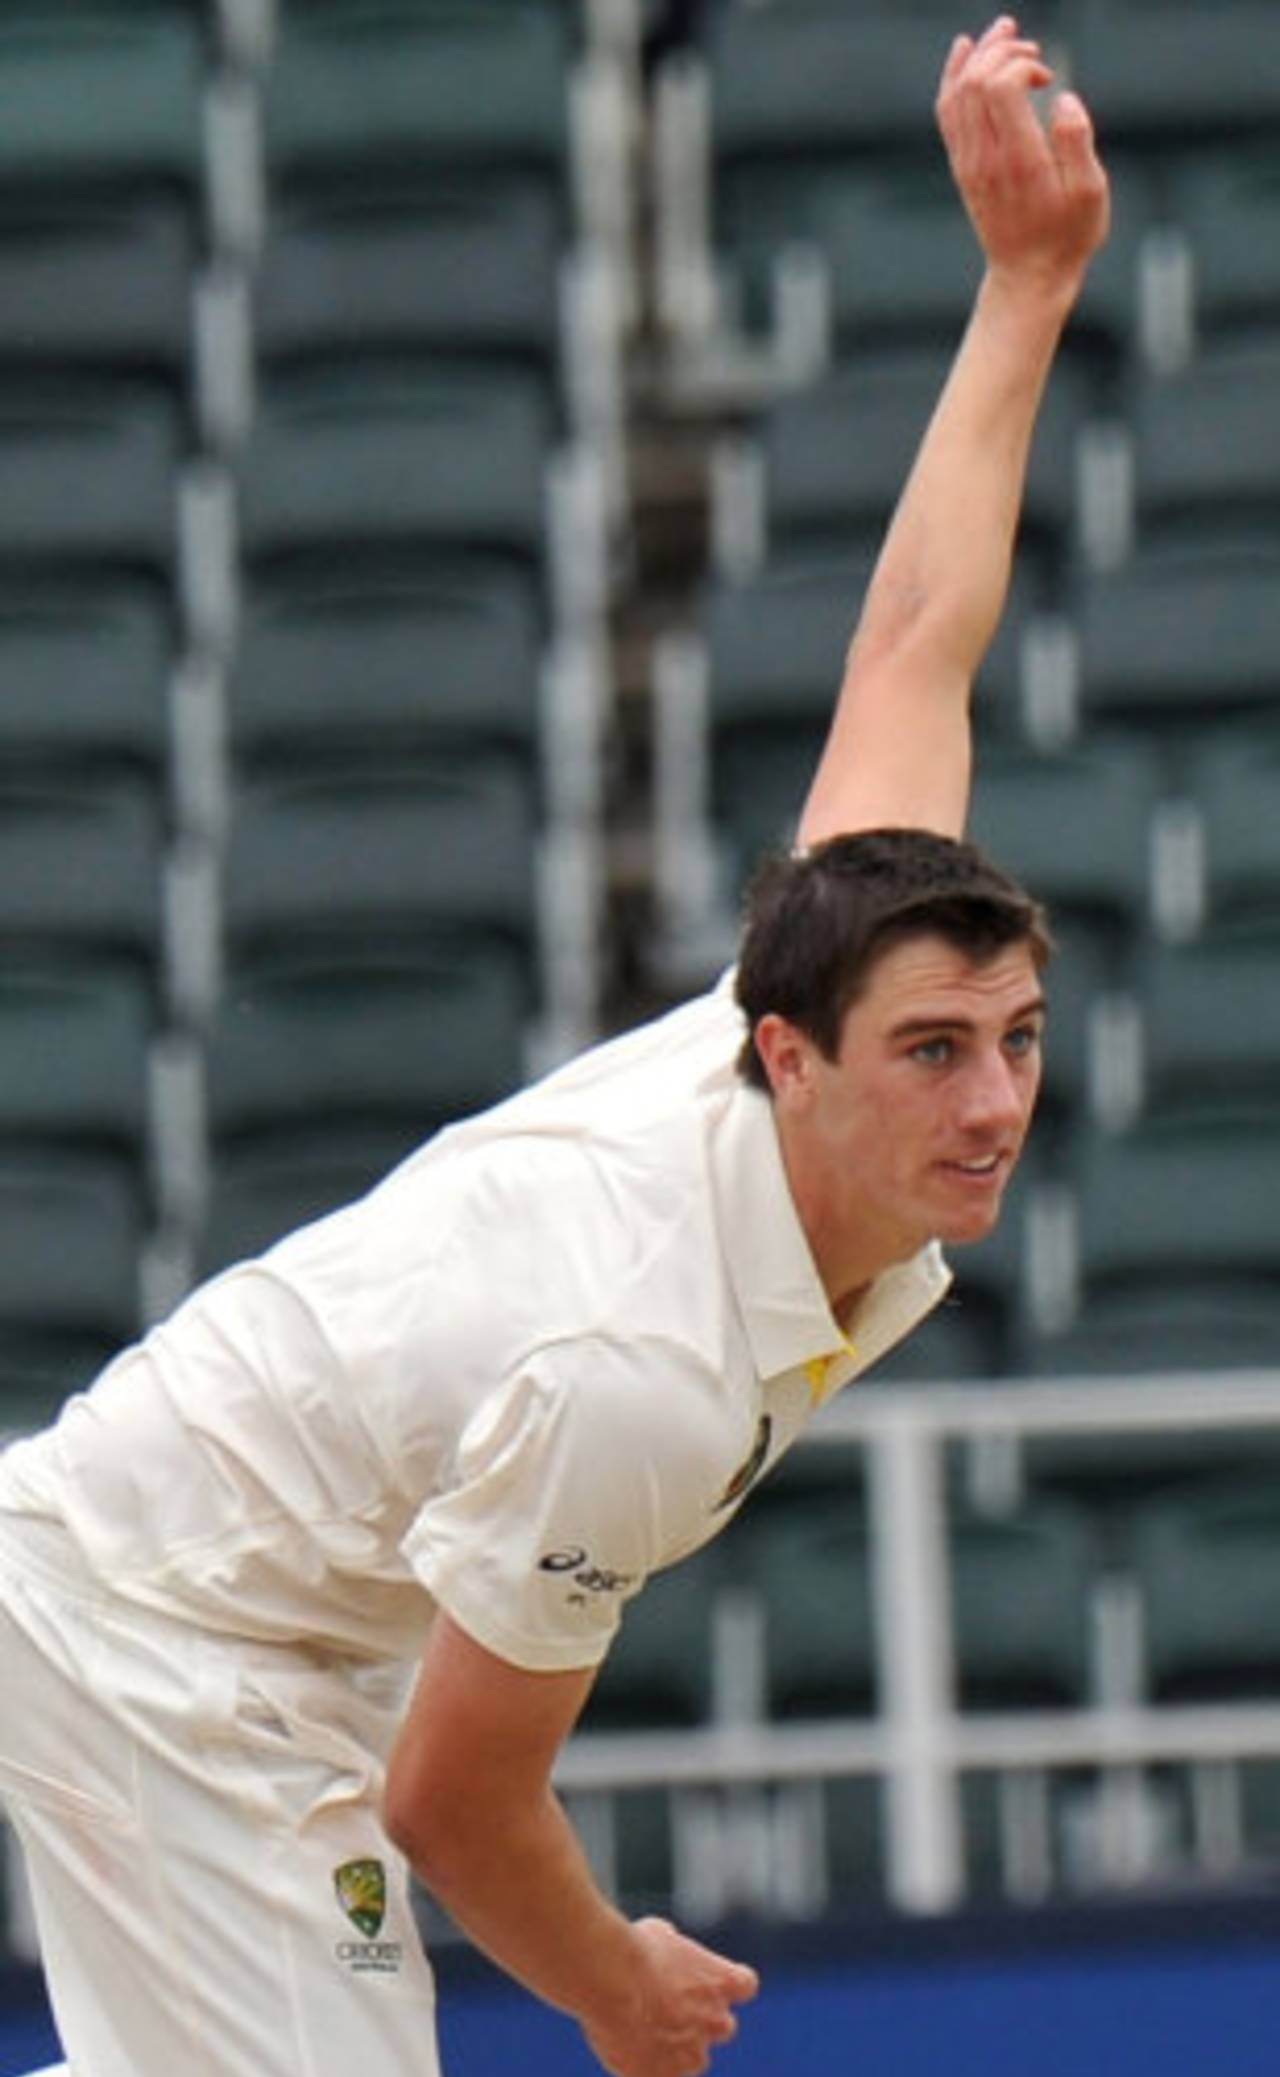 Pat Cummins continued to impress in his debut Test, South Africa v Australia, 2nd Test, Johannesburg, 4th day, November 20, 2011